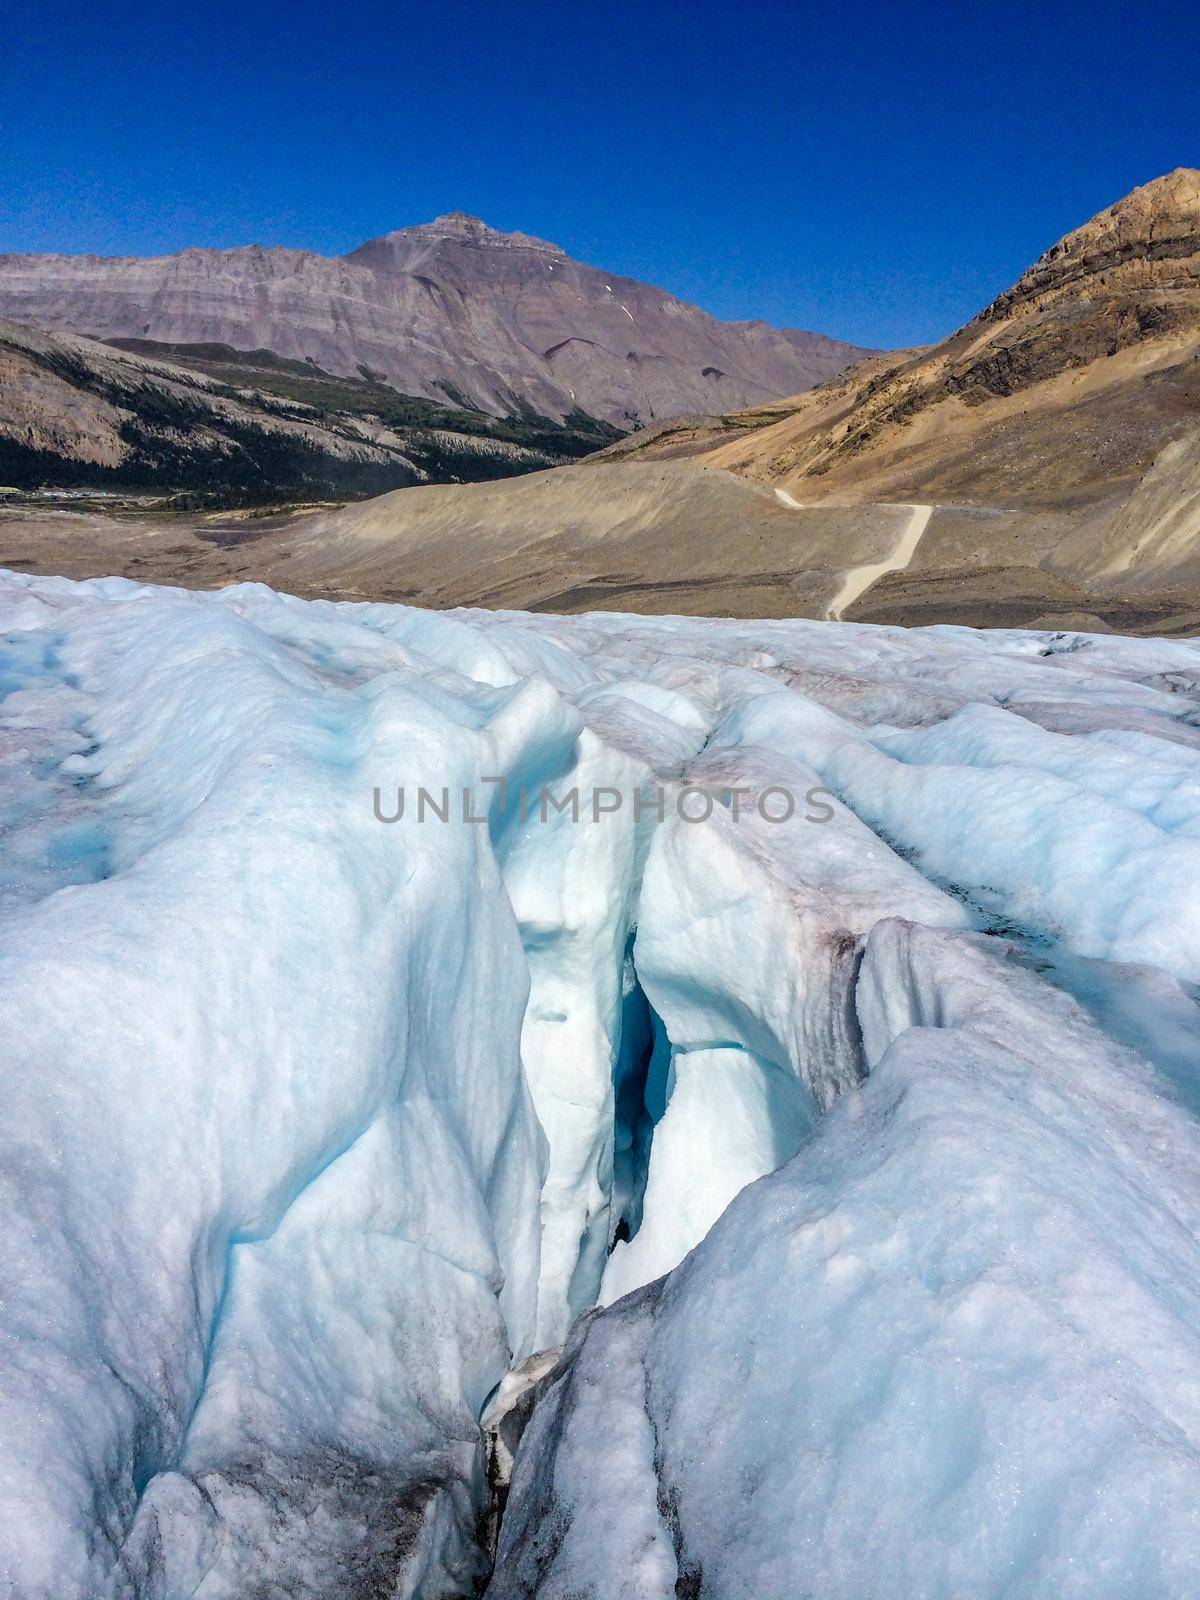 Typical Crevice Athabasca Glacier in Jasper National Park, Alberta Canada